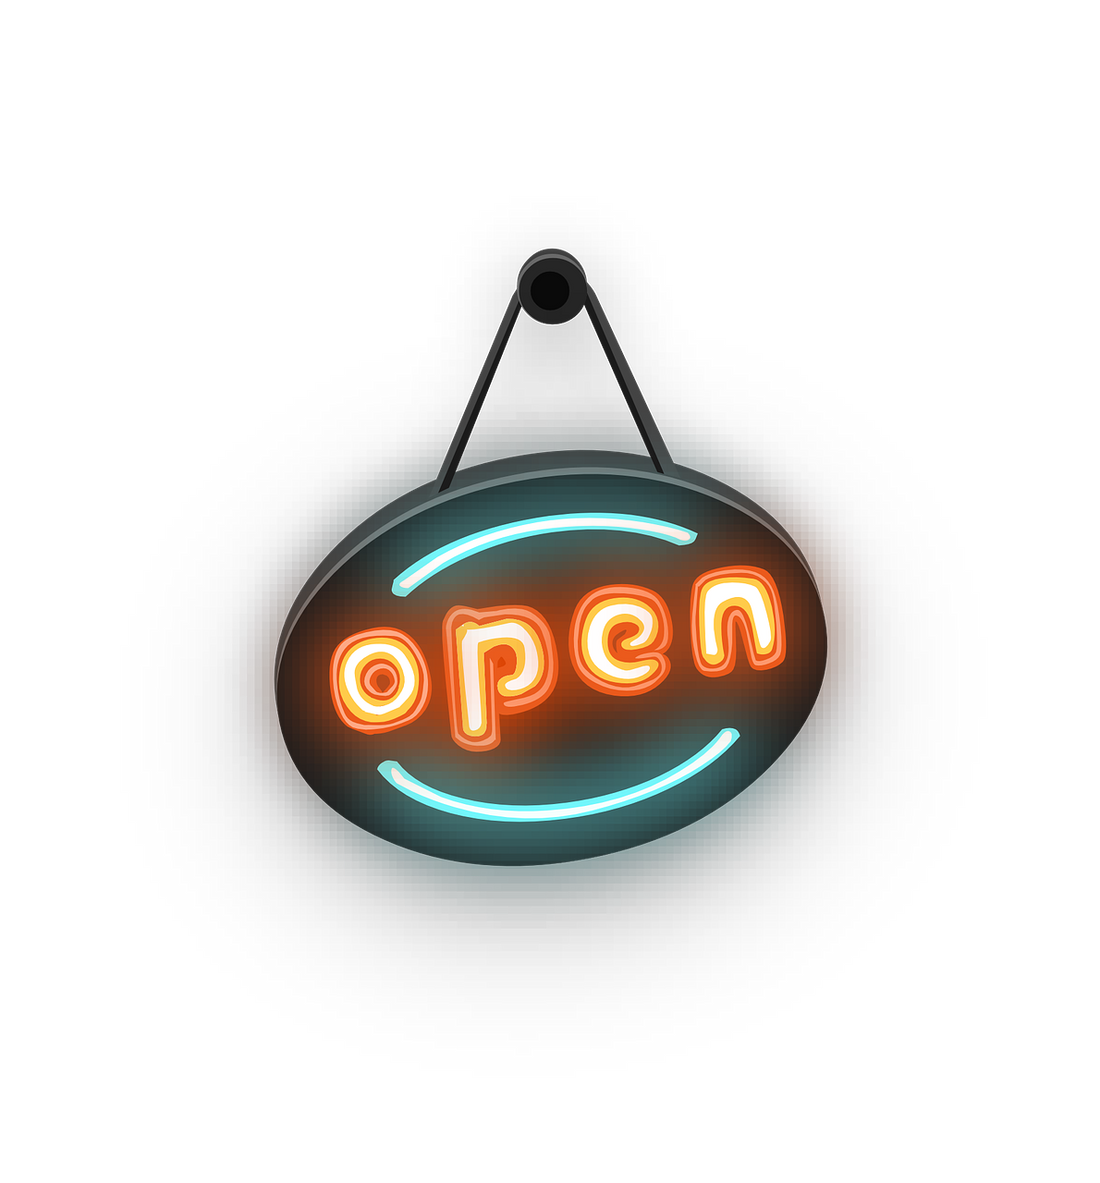 open sign hung on glass door. The words give the appearance of being written in fluorescence light tubes